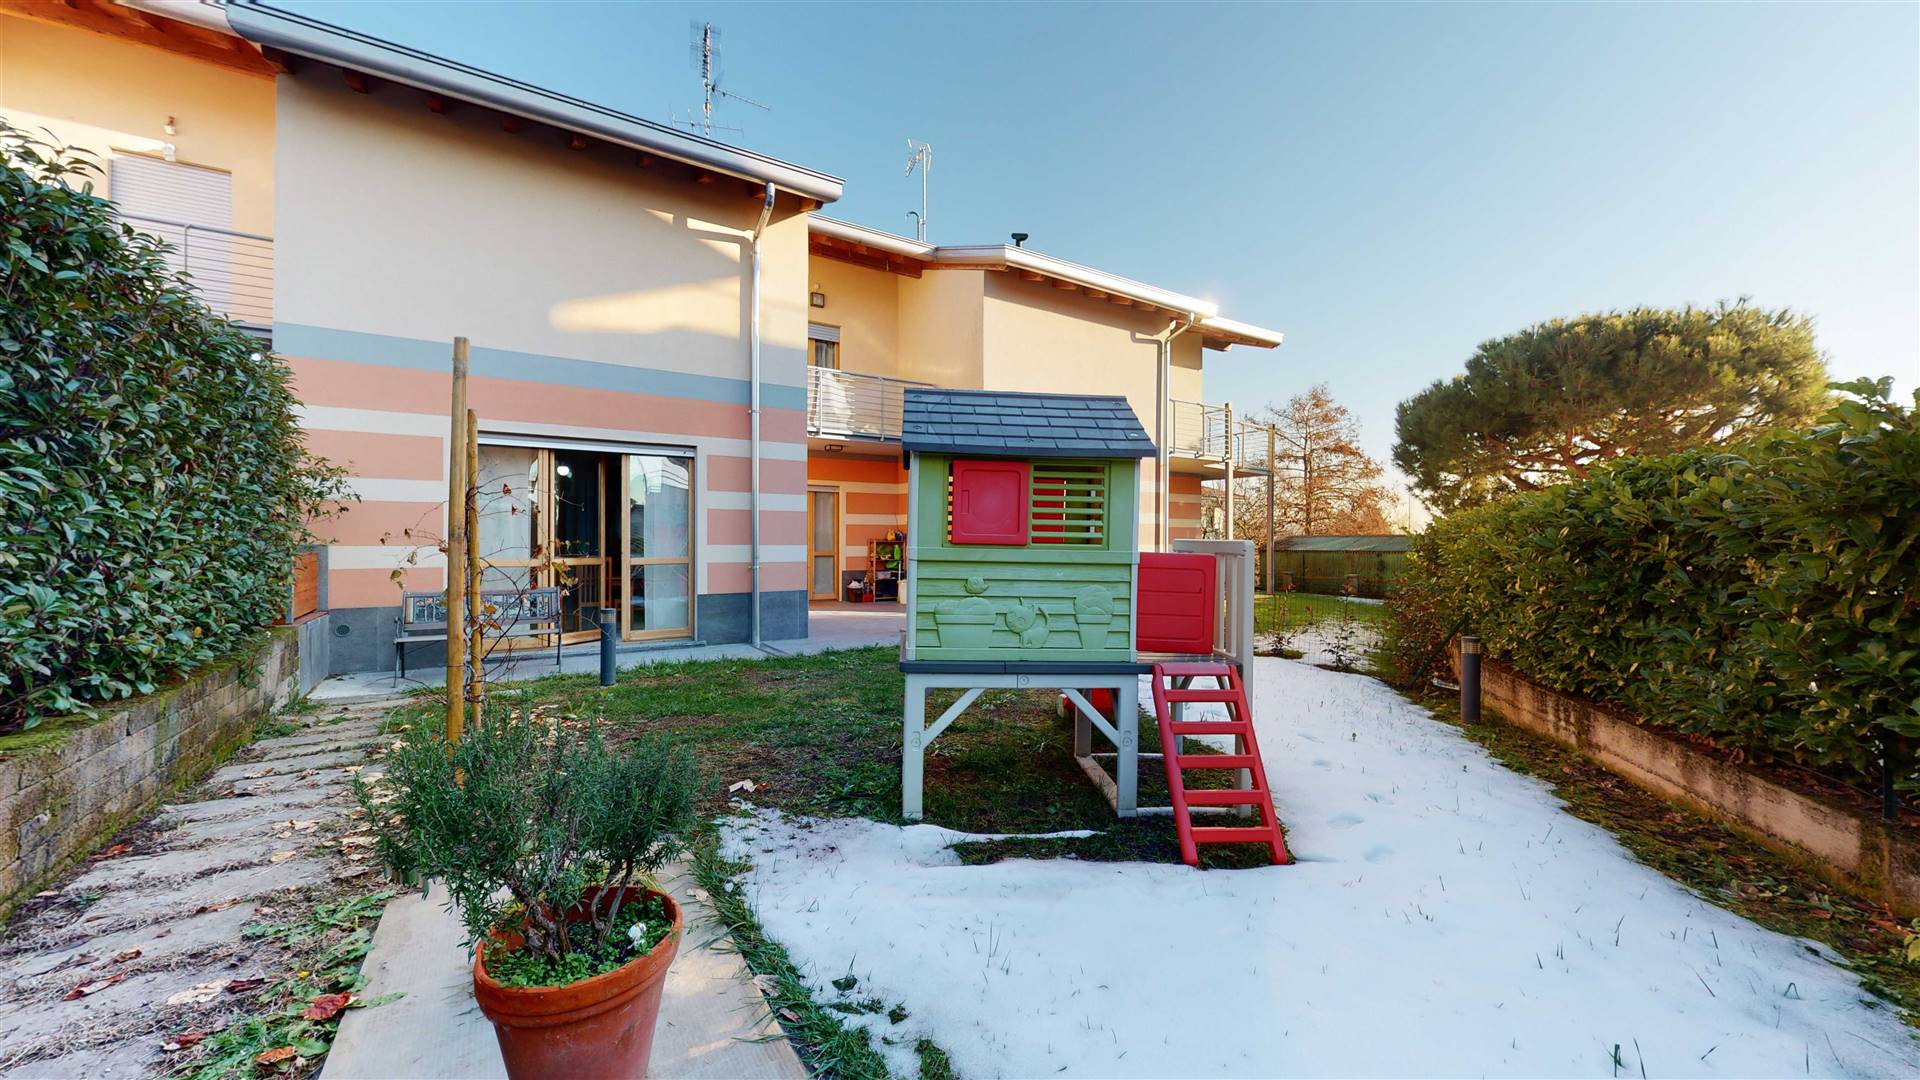 CREMNAGO, INVERIGO, Terraced house for sale, Excellent Condition, Heating To floor, Energetic class: B, Epi: 58,49 kwh/m2 year, composed by: 4 Rooms, 